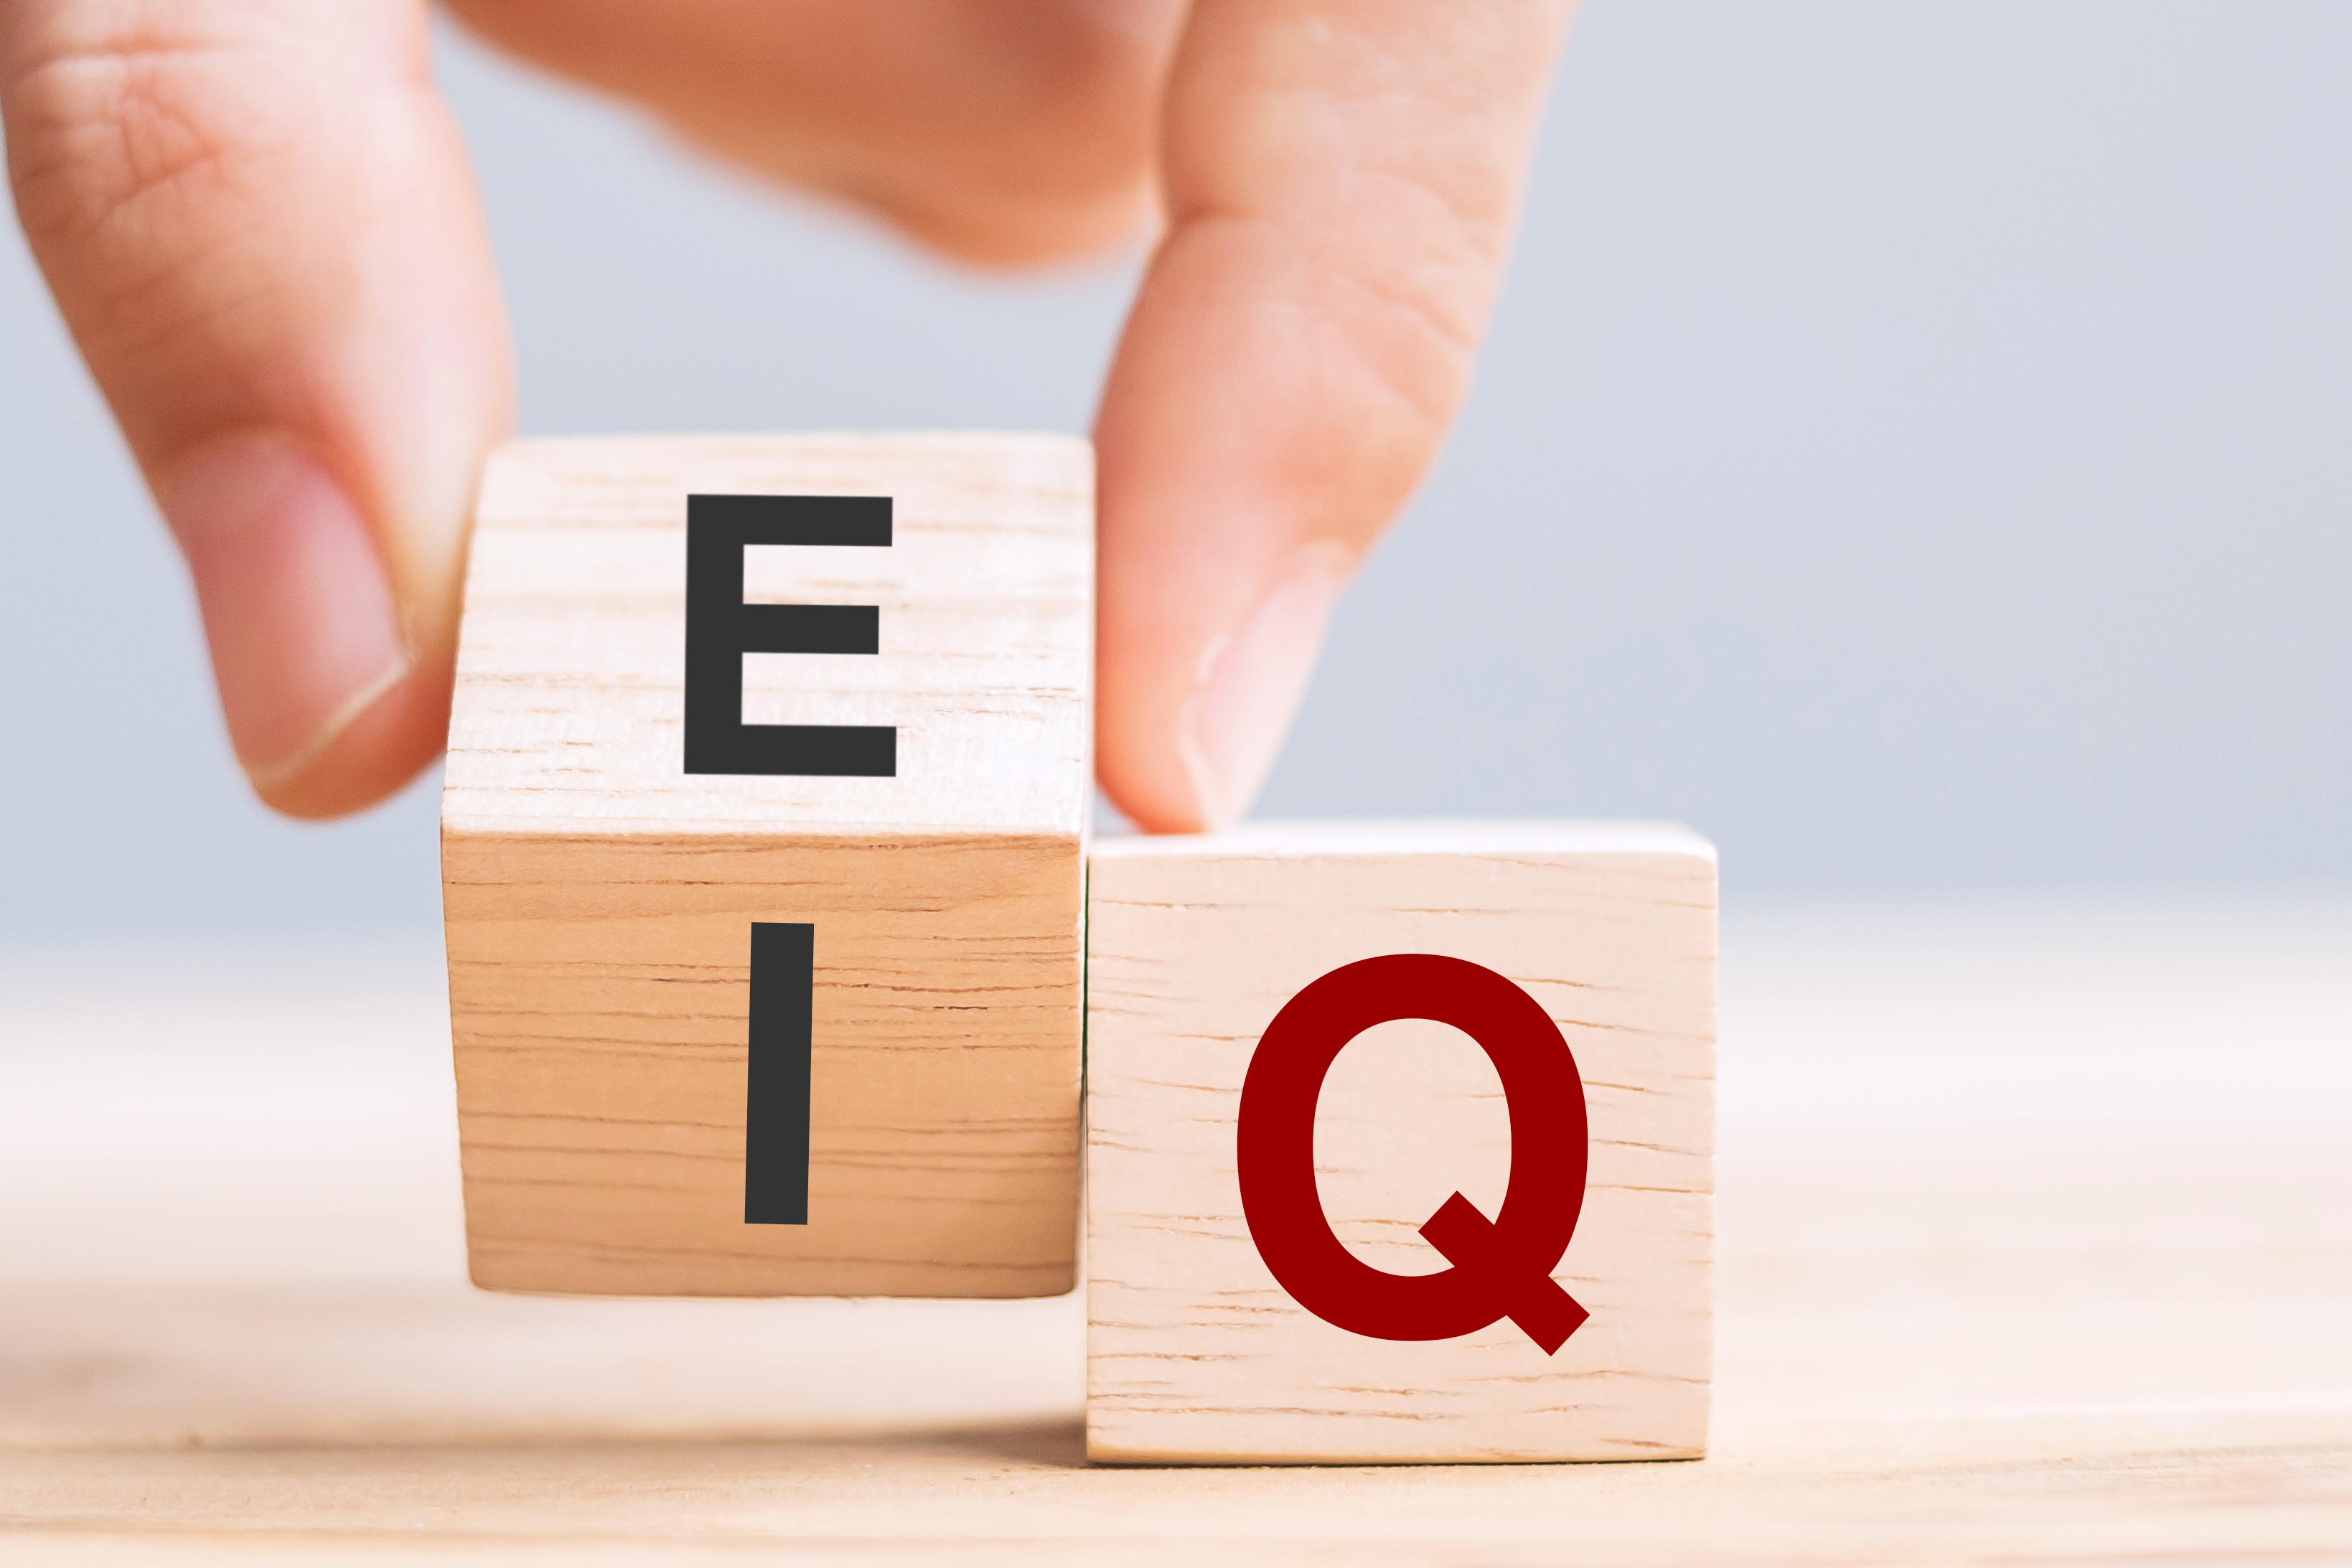 EQ recruitment test provides the answer, support for evaluating the candidate competencies